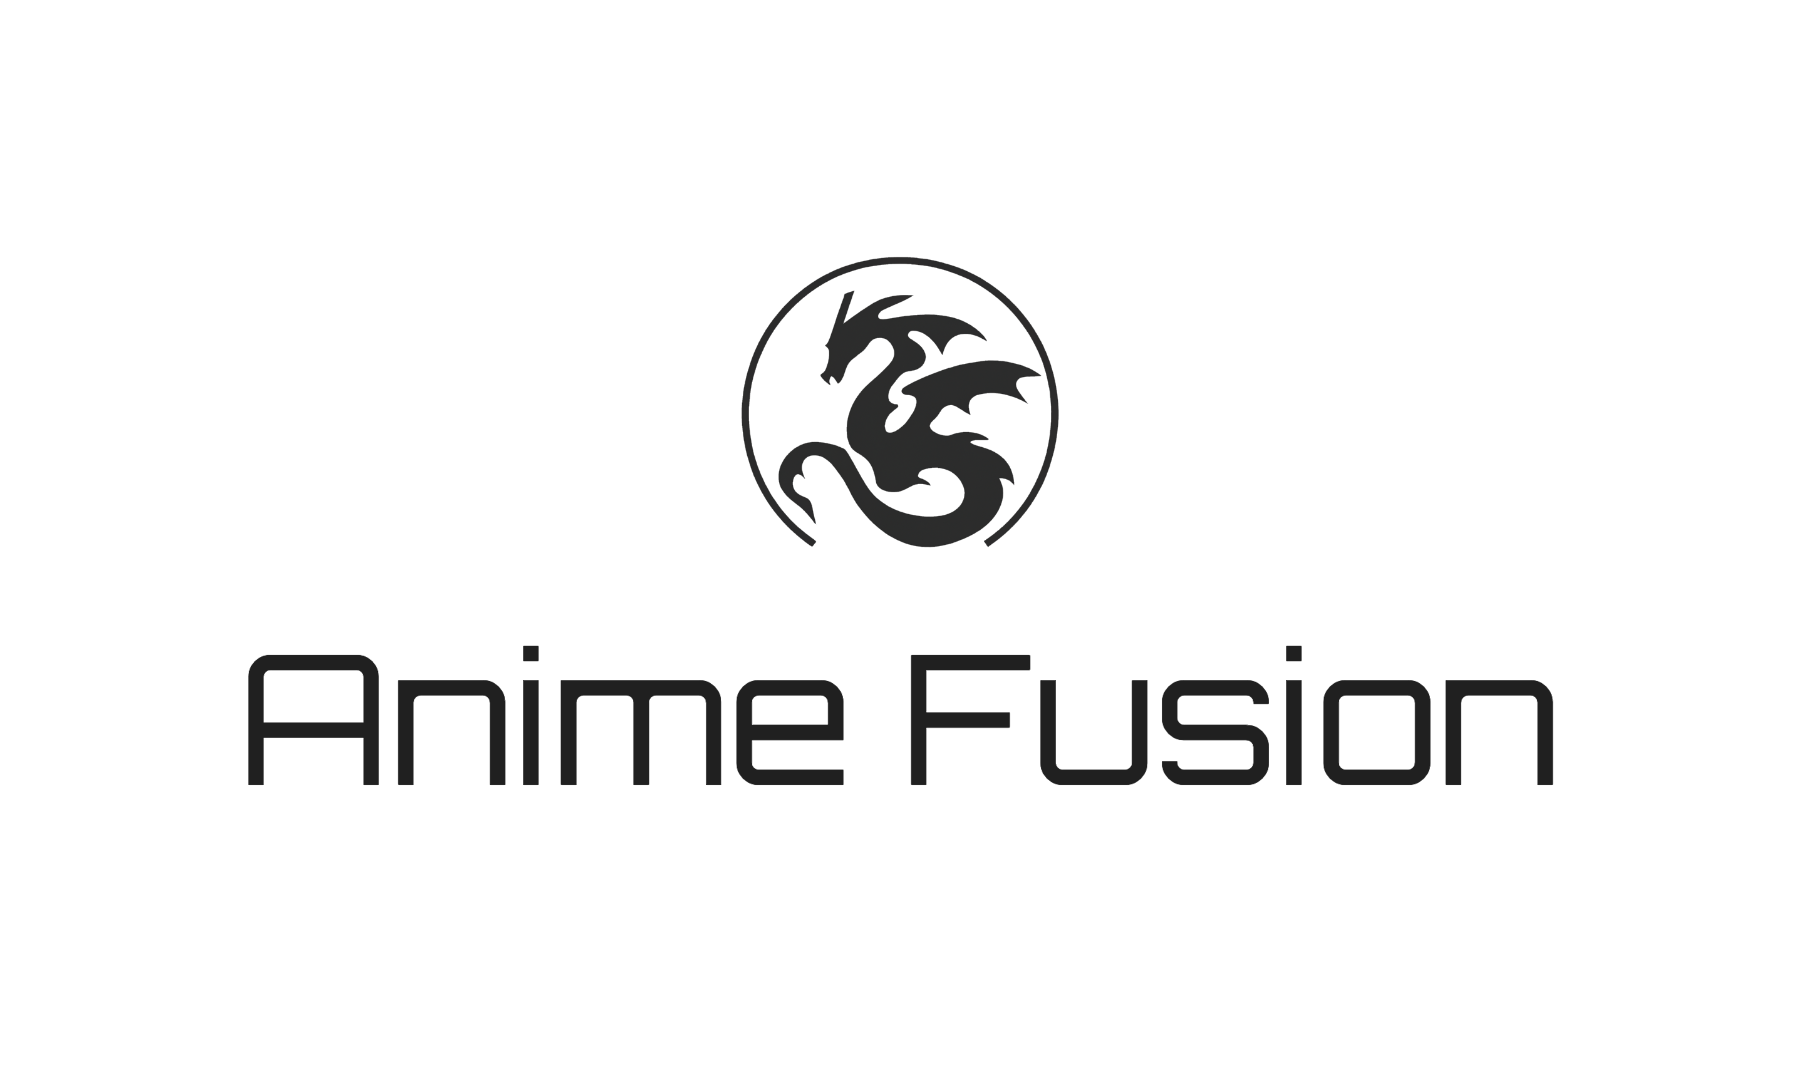 What are some instantly recognizable logo/symbols from anime? : r/anime